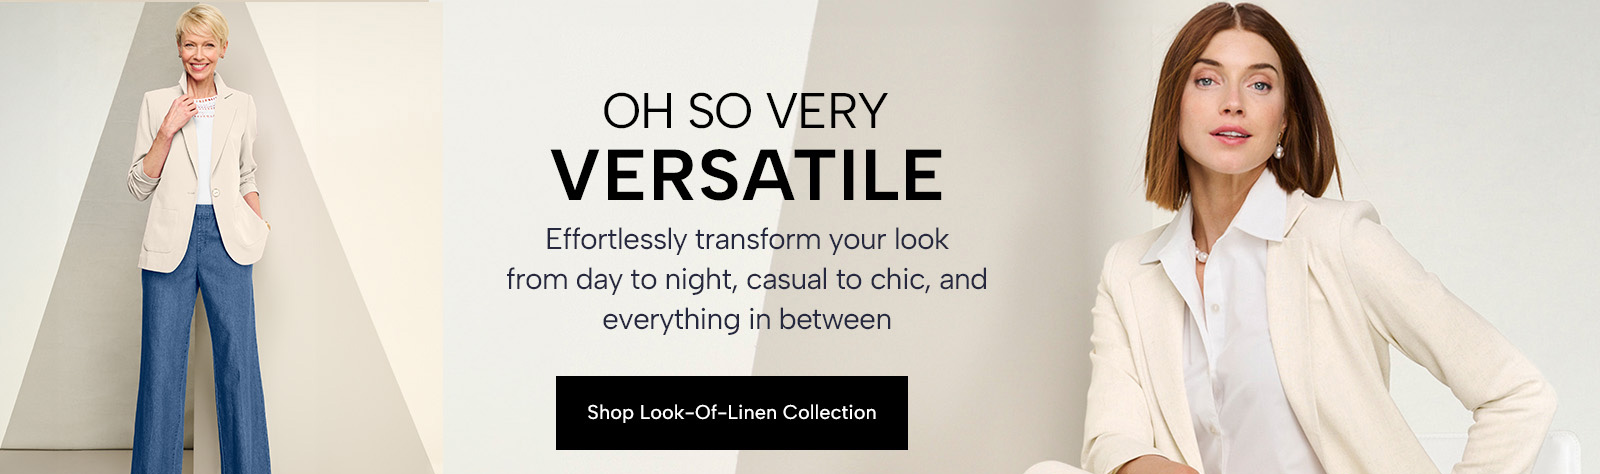 Oh So Very Versatile - effortlessly transform your look from day to night, casual to chic, and everything in between. Shop Look-of-Linen Collection